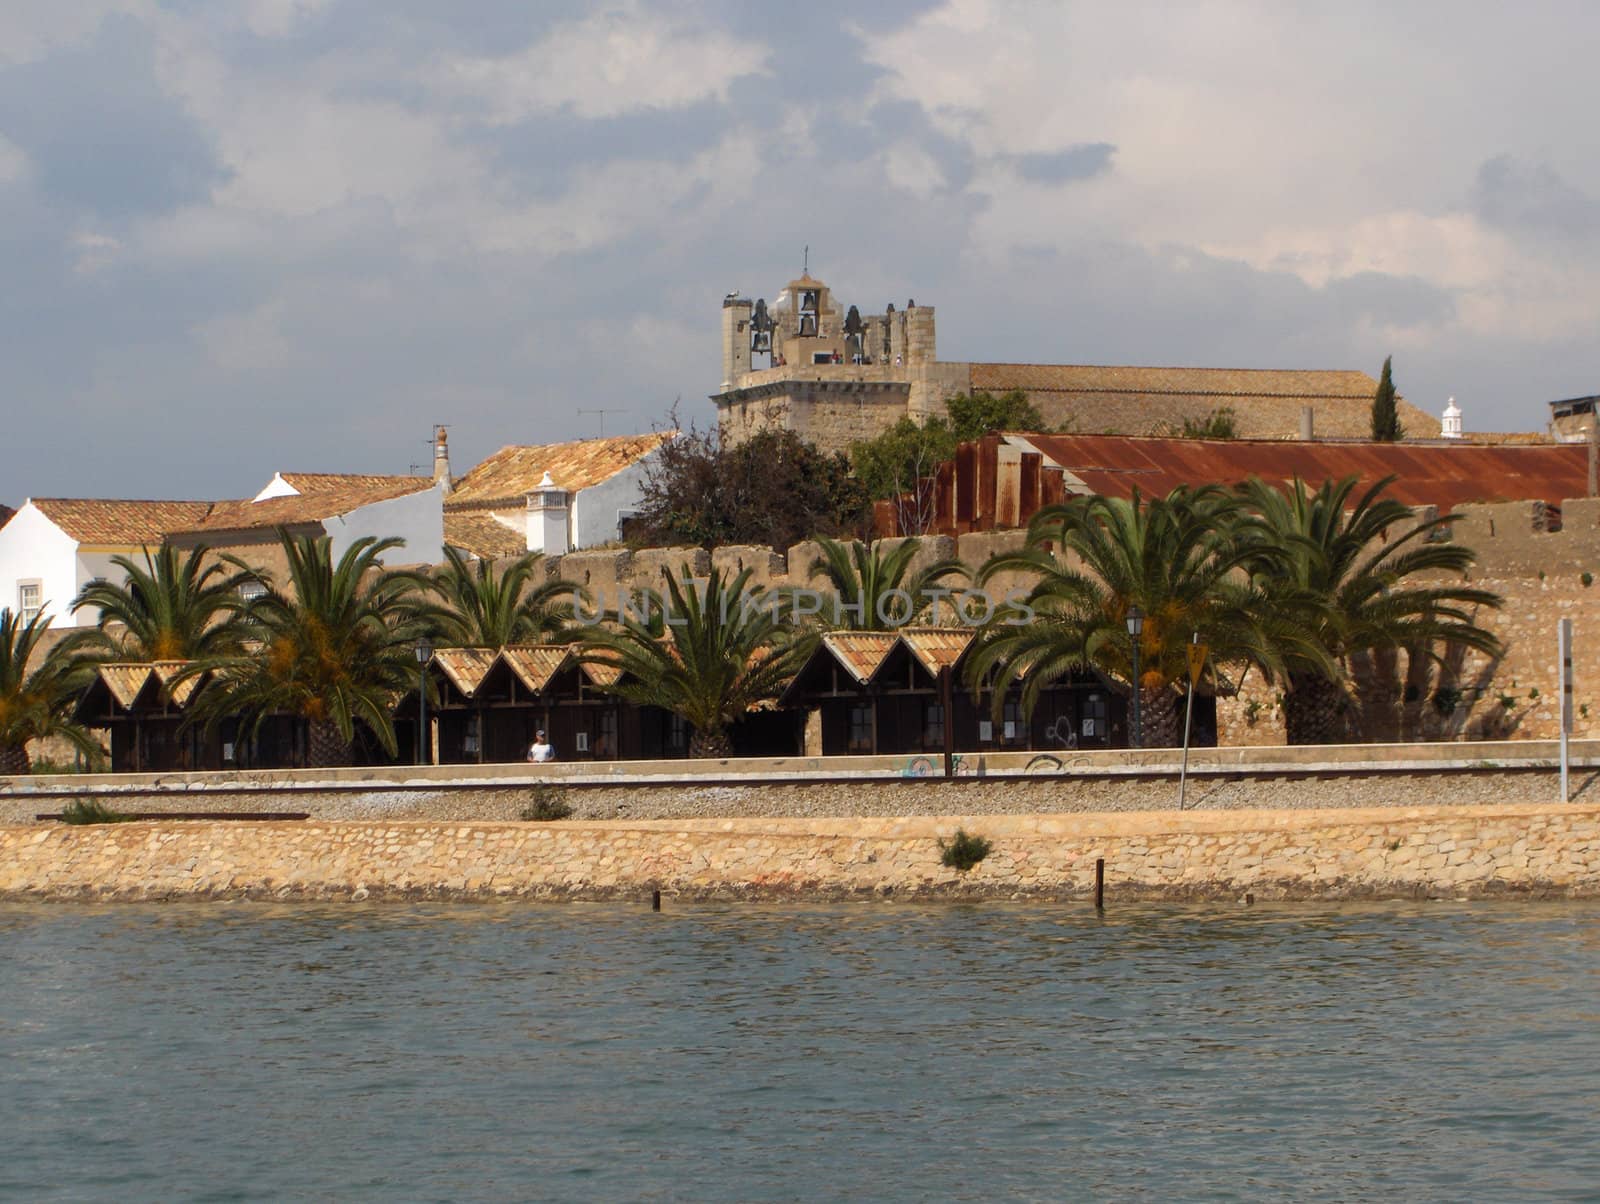 A view of the walled town of Faro, Partugal, from the bay.